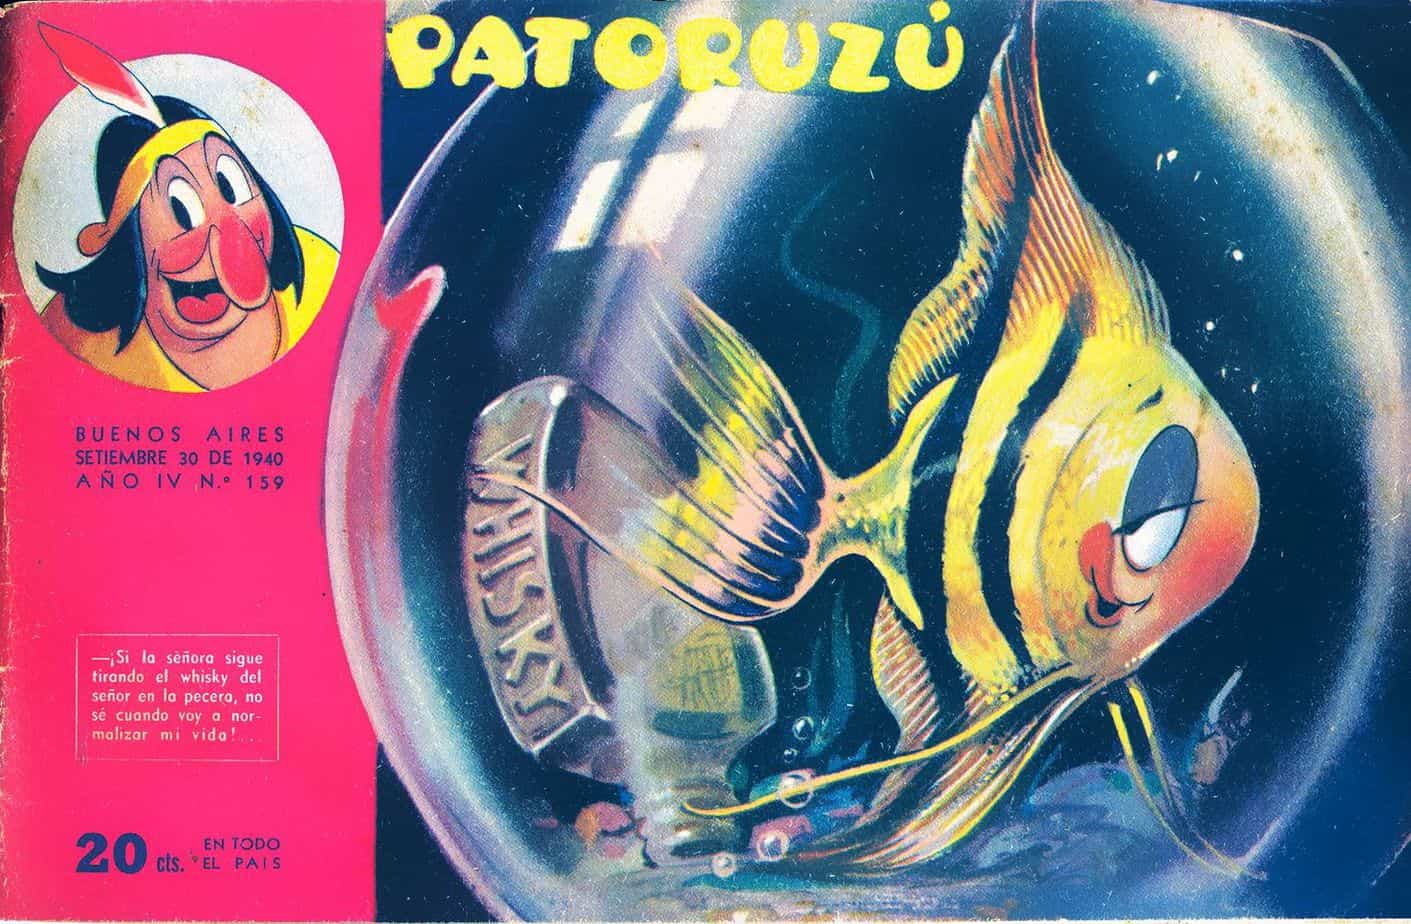 Divito, Patoruzú If the wife keeps throwing the husband's whiskey into the fish bowl, I don't know how I'm going to normalize my life